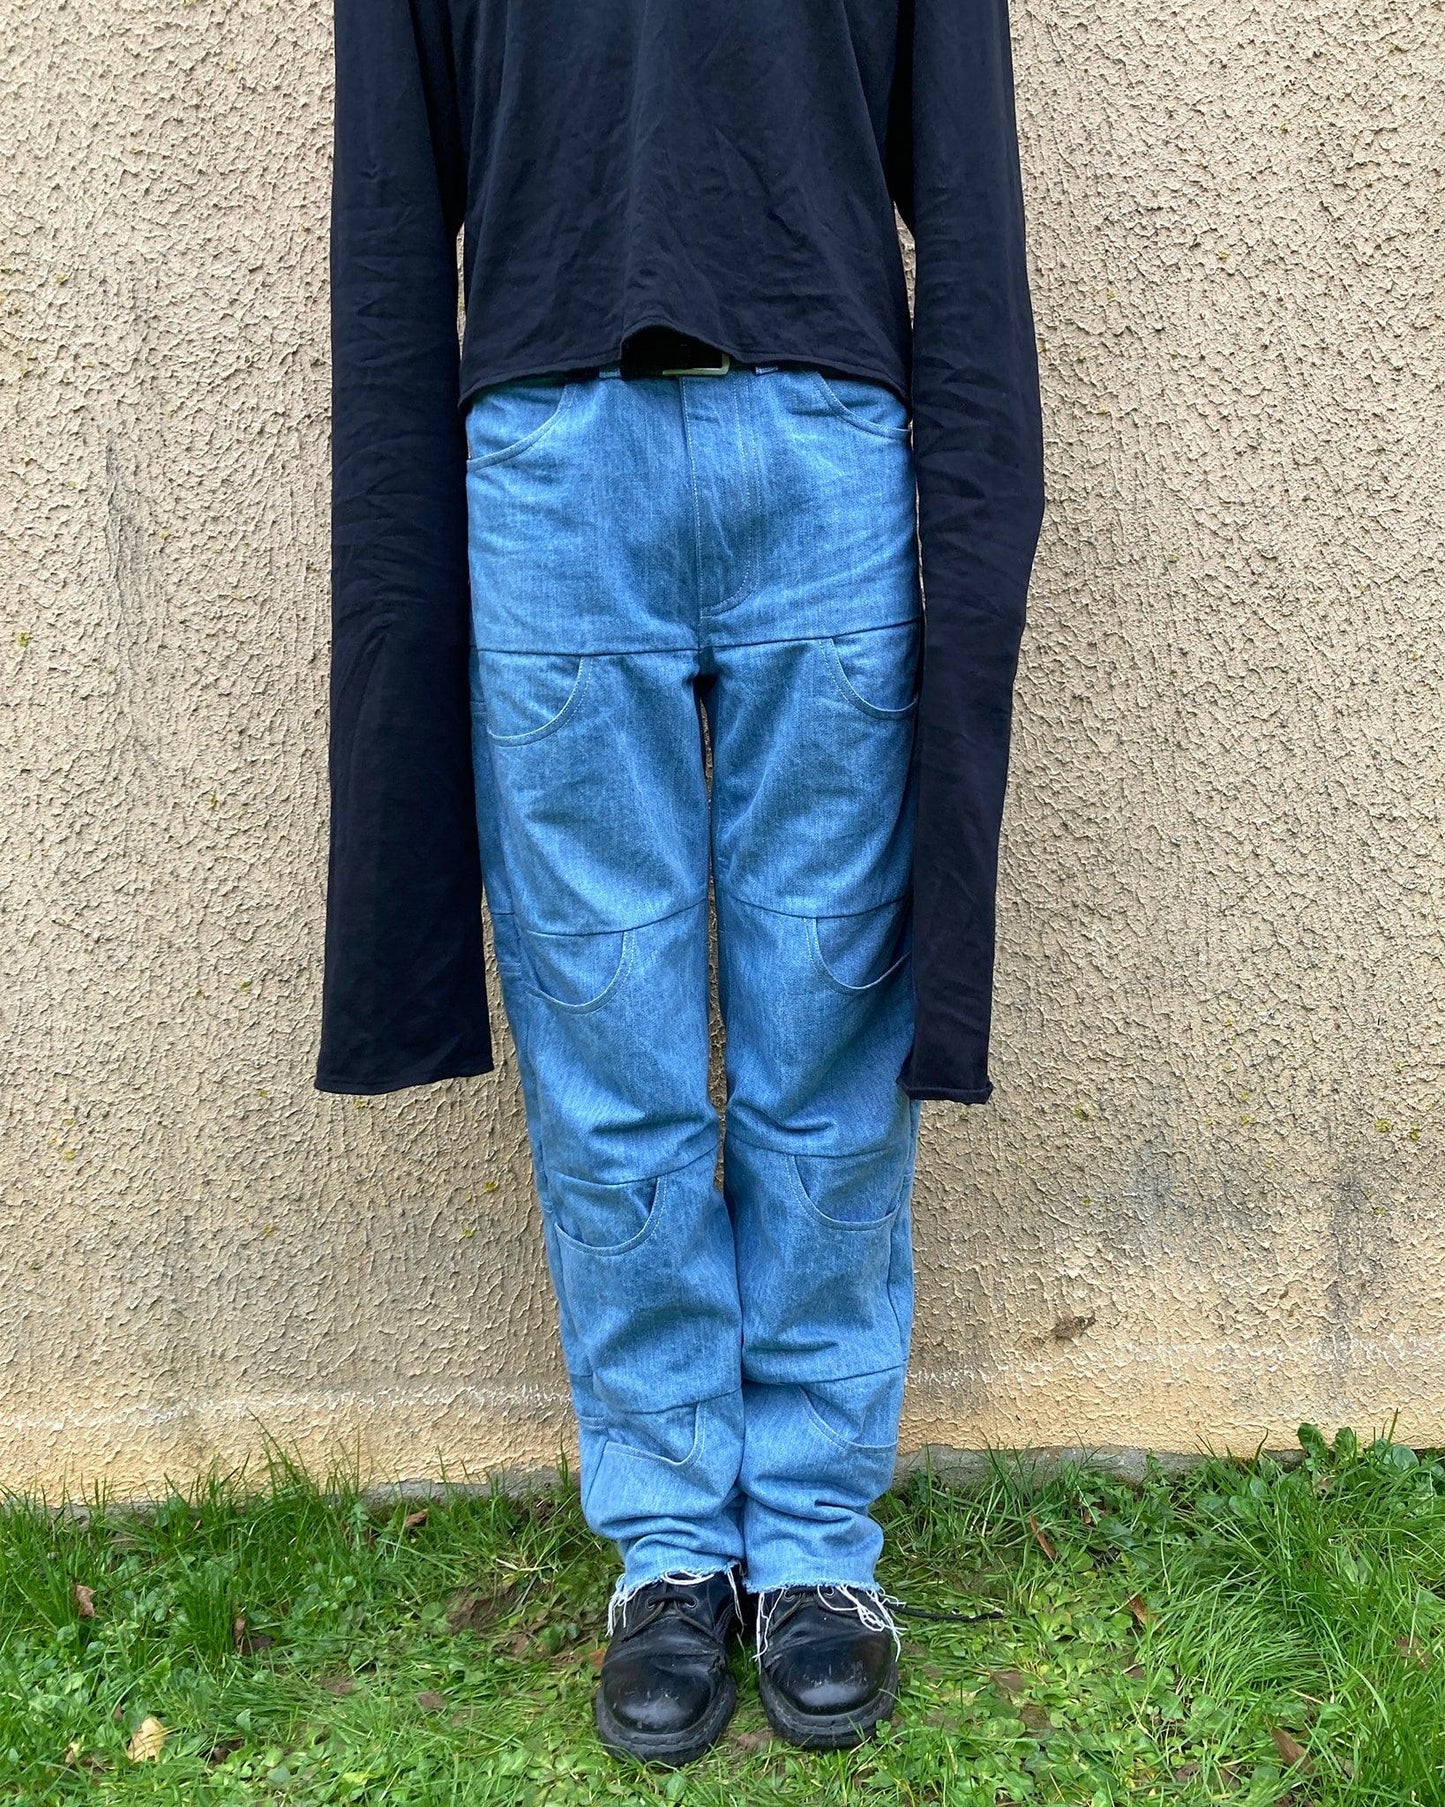 The front of the Unlimited Space Jeans featuring 10 front pockets